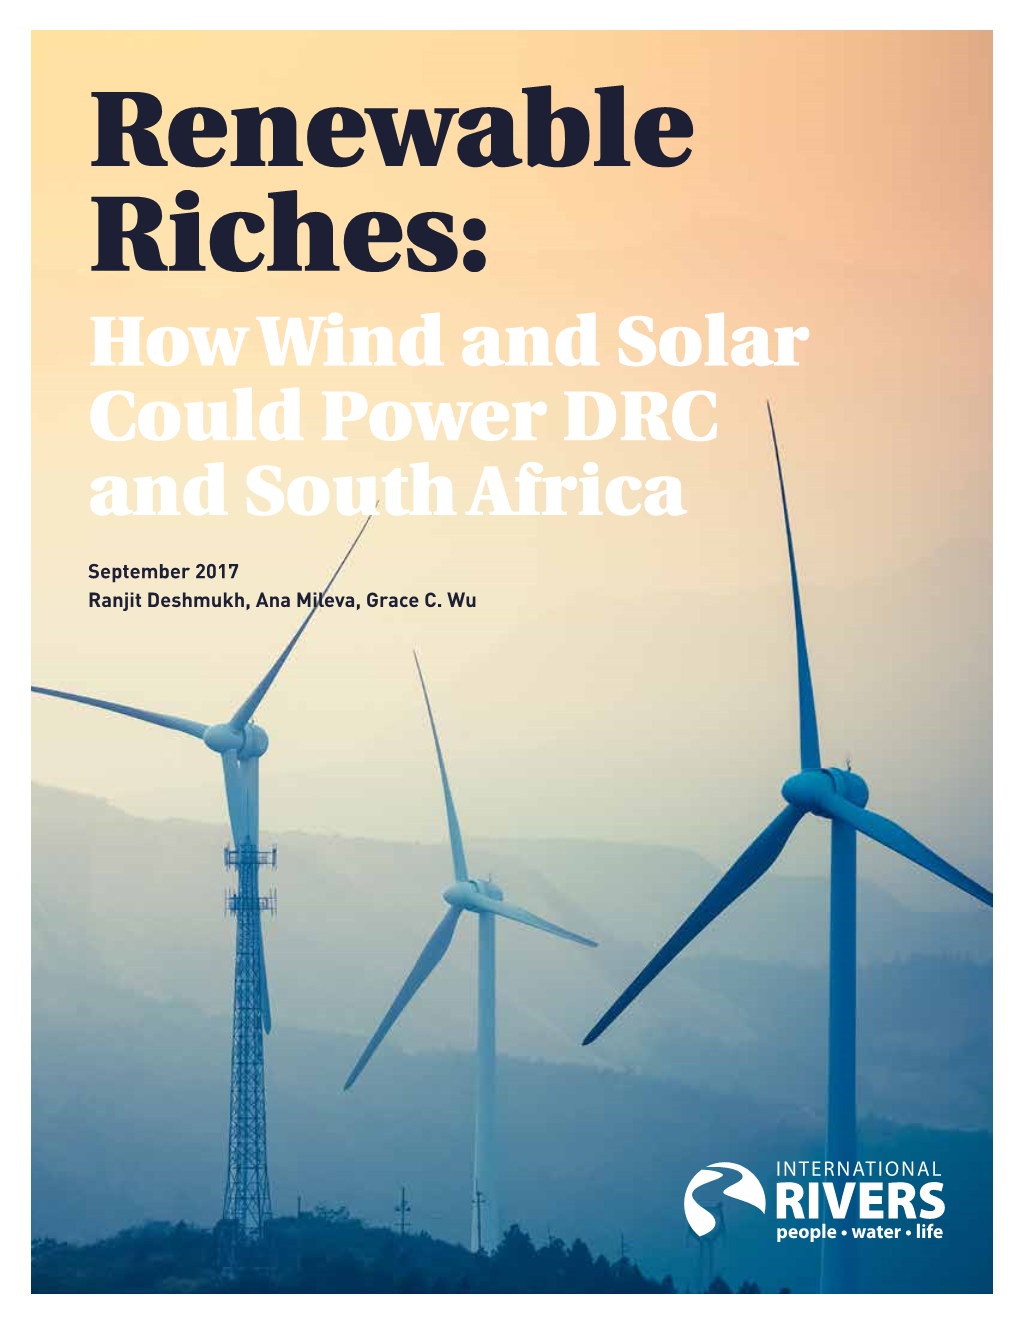 Renewable Riches: How Wind and Solar Could Power DRC and South Africa